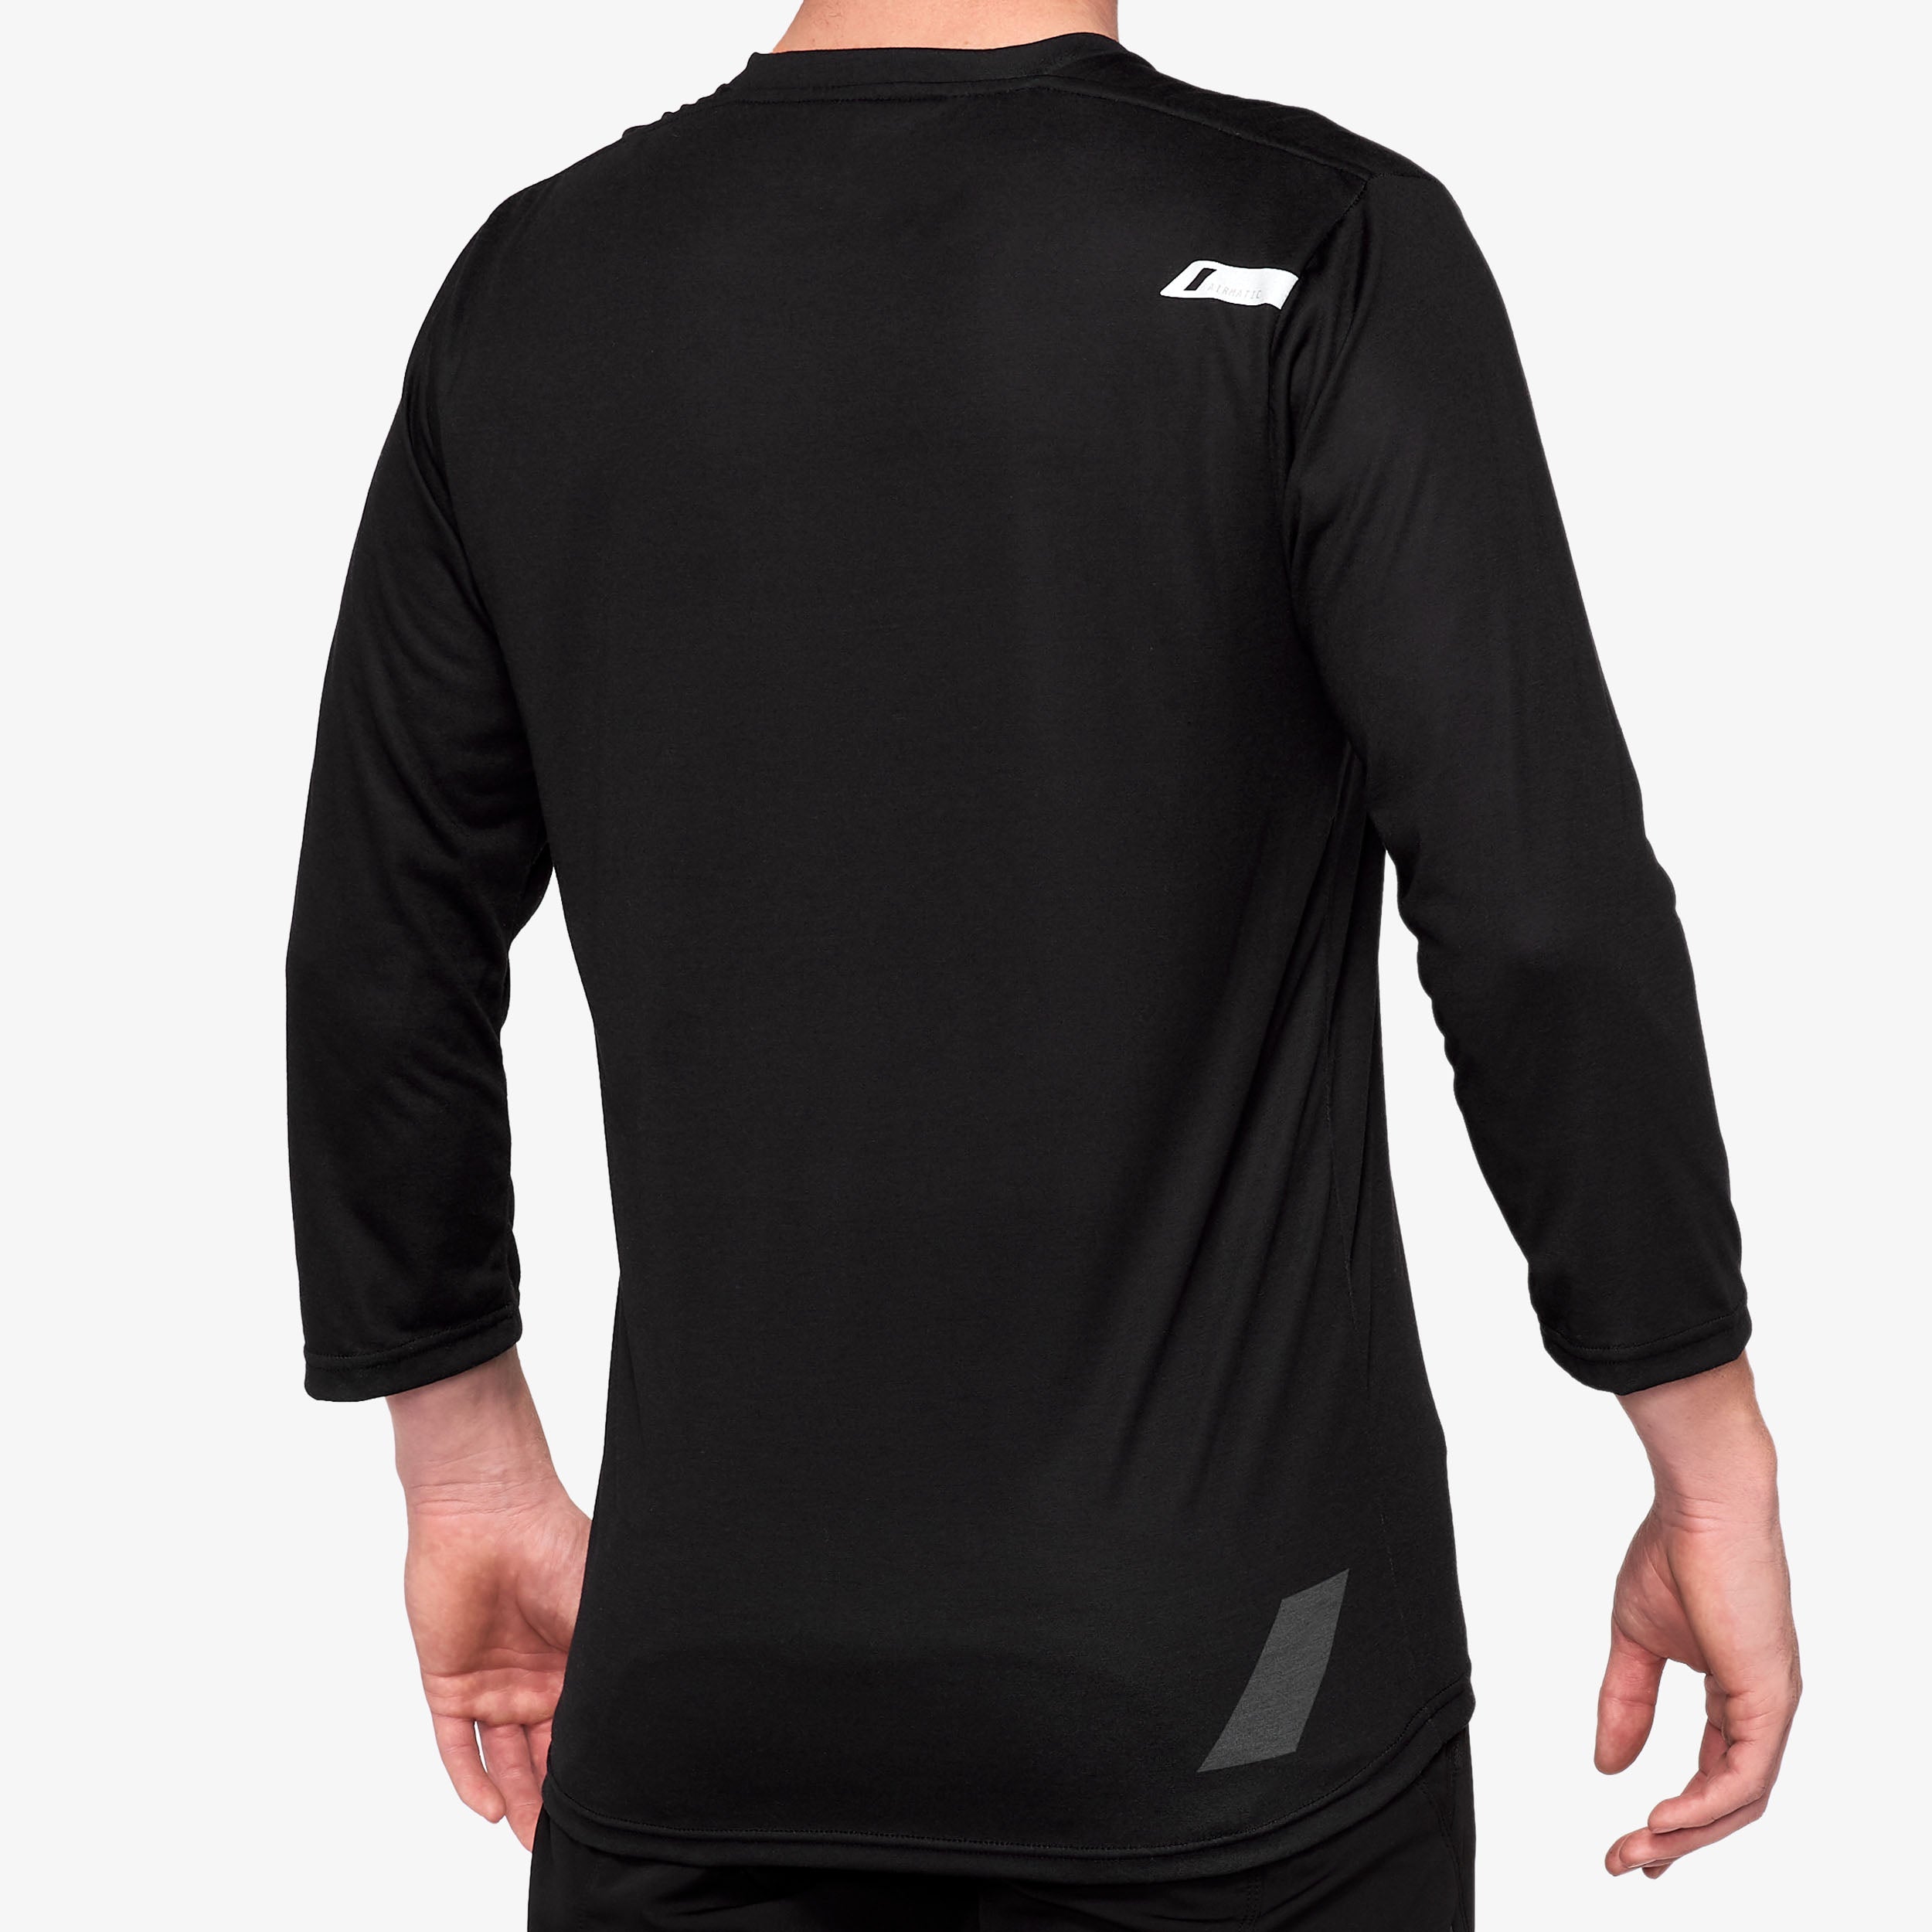 AIRMATIC 3/4 Sleeve Jersey Black - Secondary